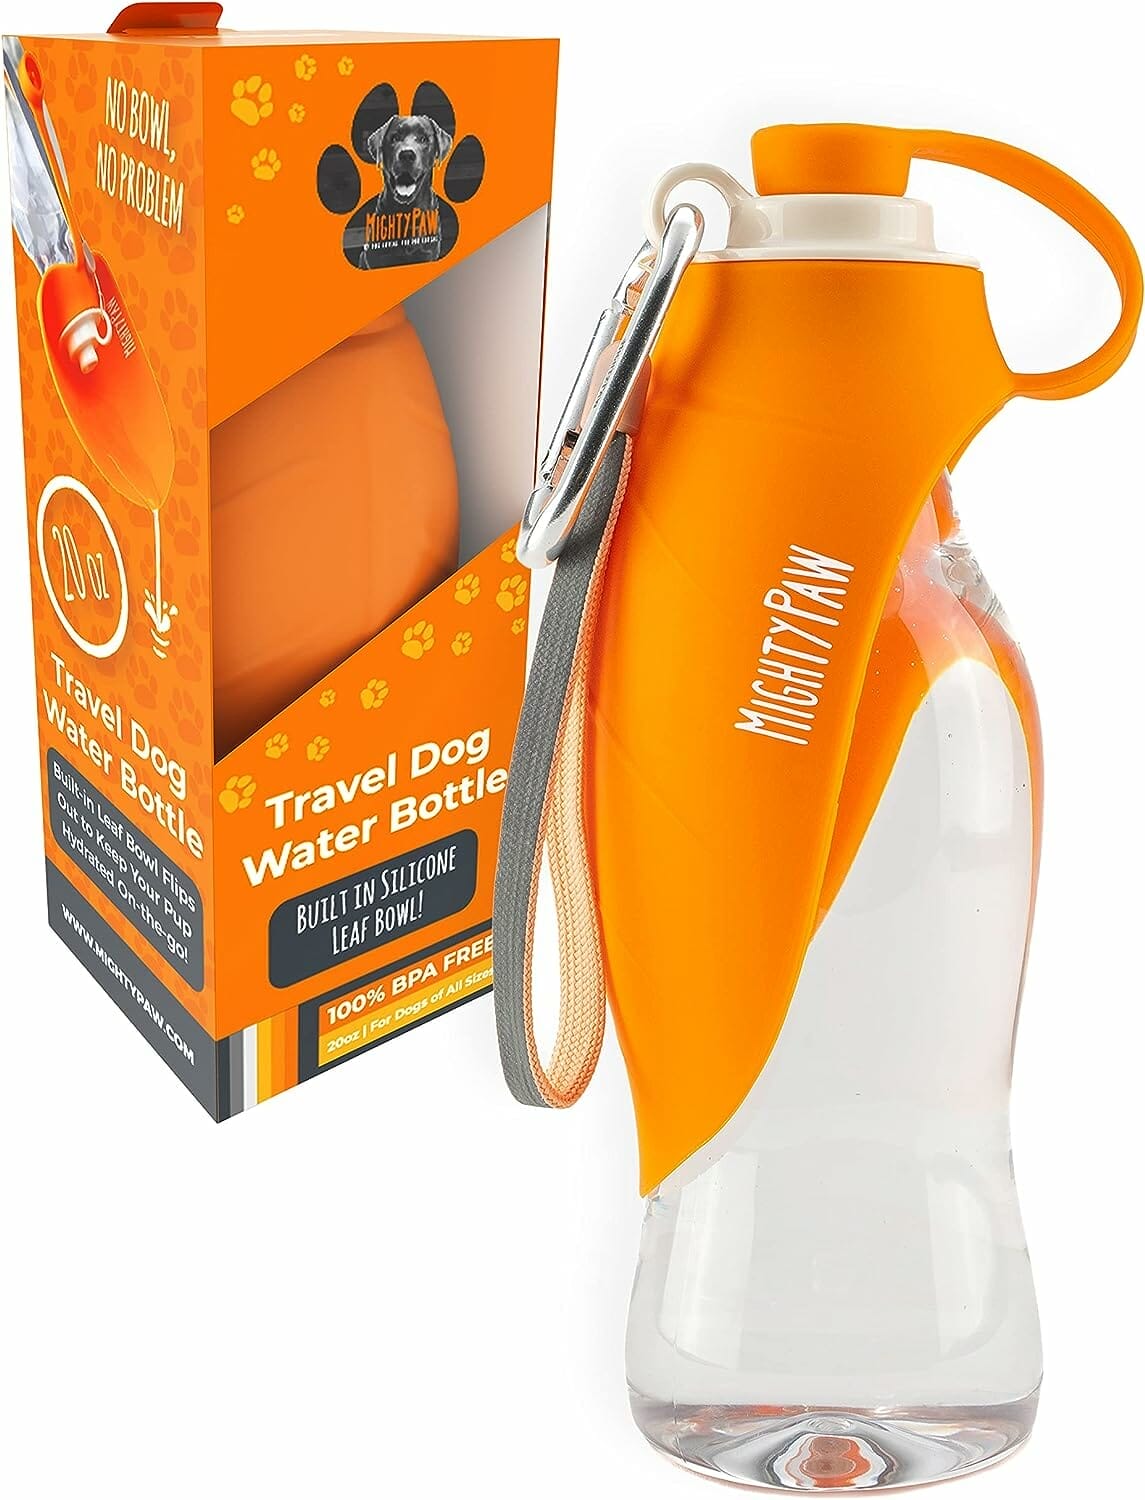 Mighty Paw Travel Dog Water Bottle Review